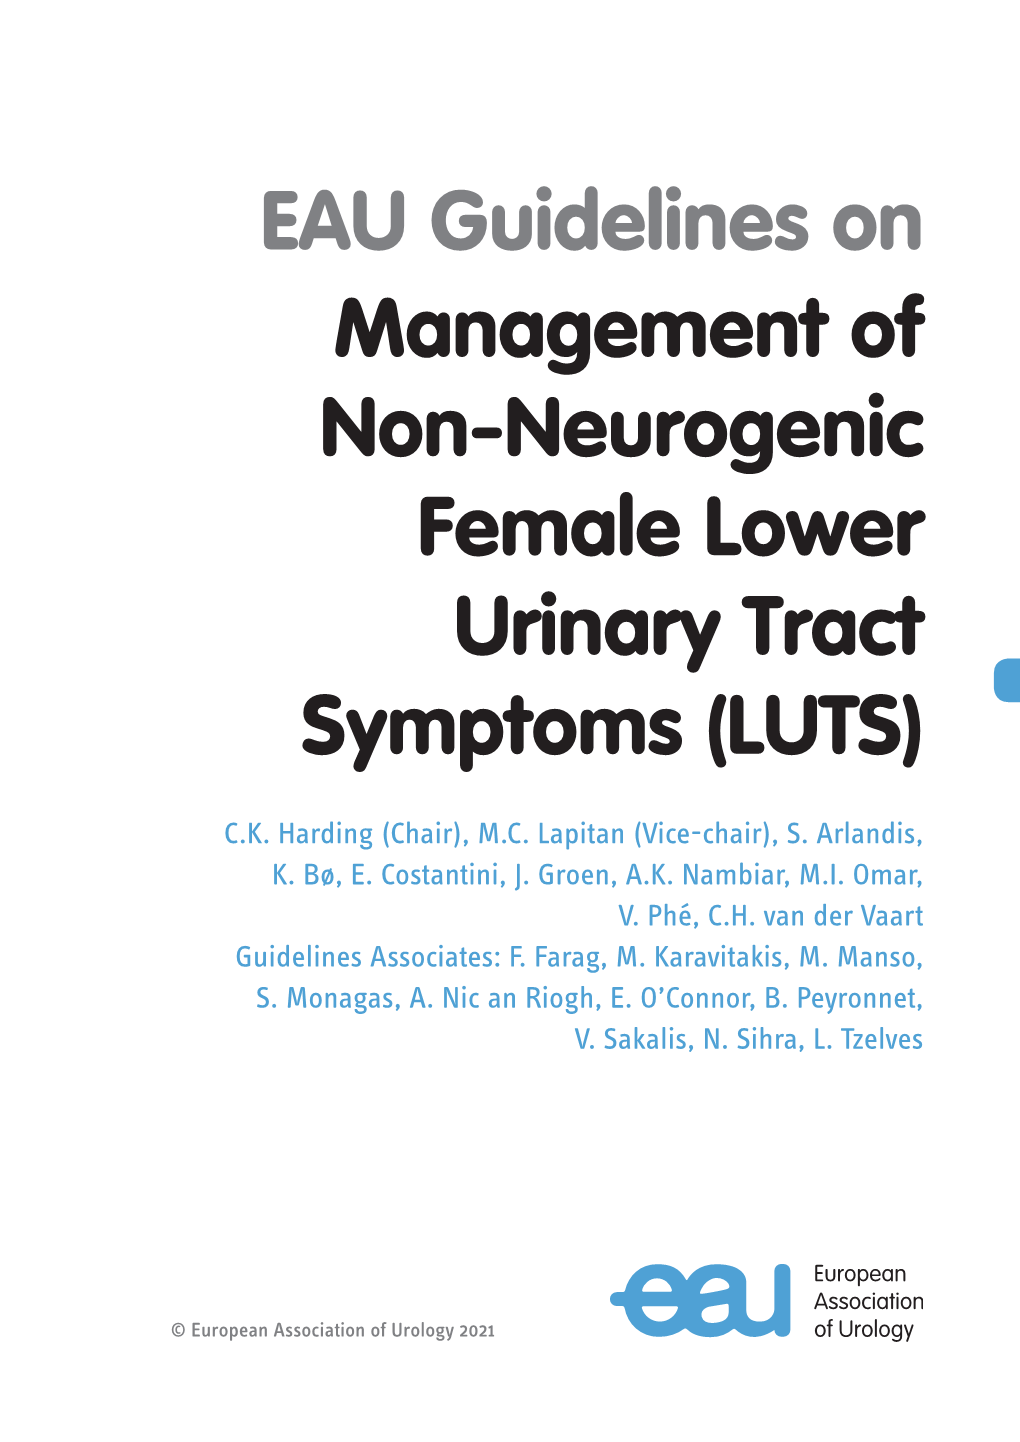 Management of Non-Neurogenic Female Lower Urinary Tract Symptoms (LUTS)